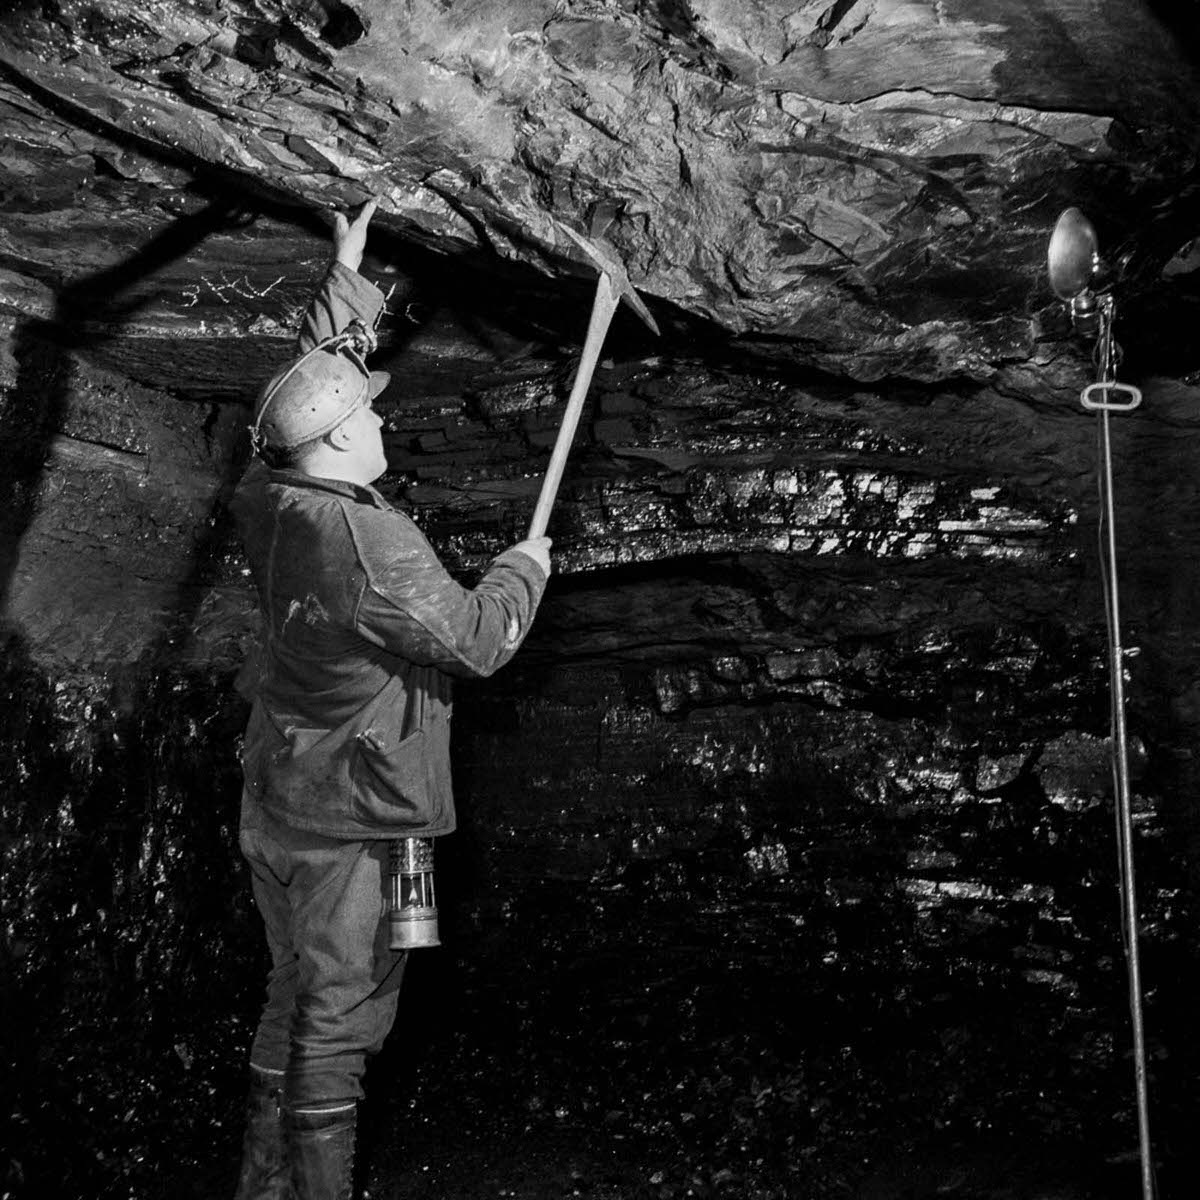 A miner tests the stability of the tunnel roof.